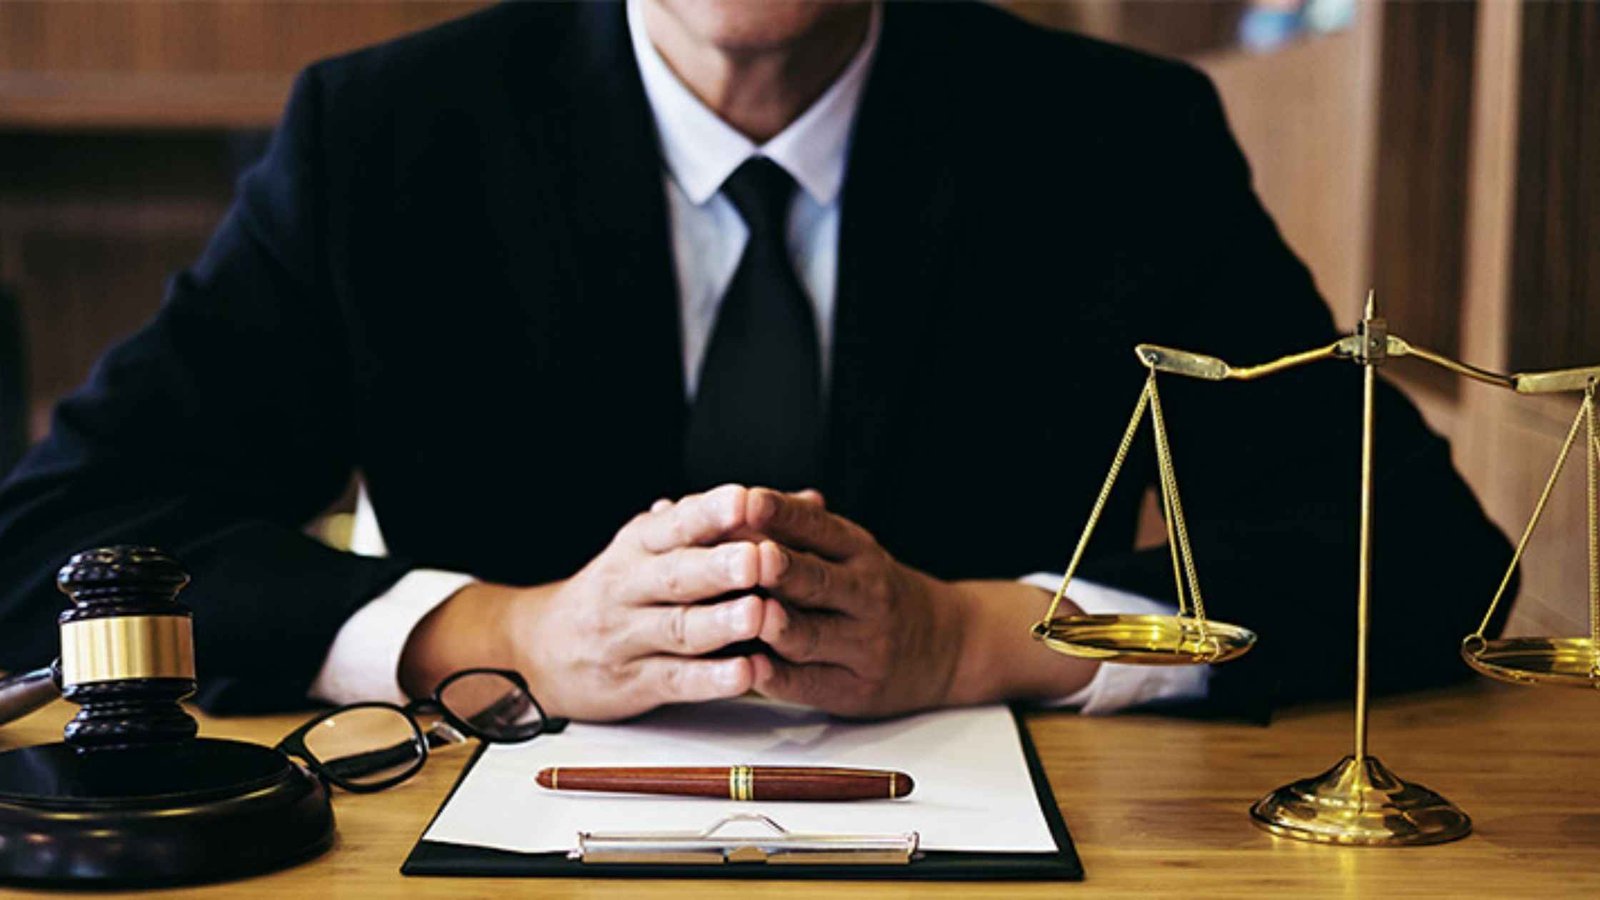 Free Legal Advice For Small Business challenges